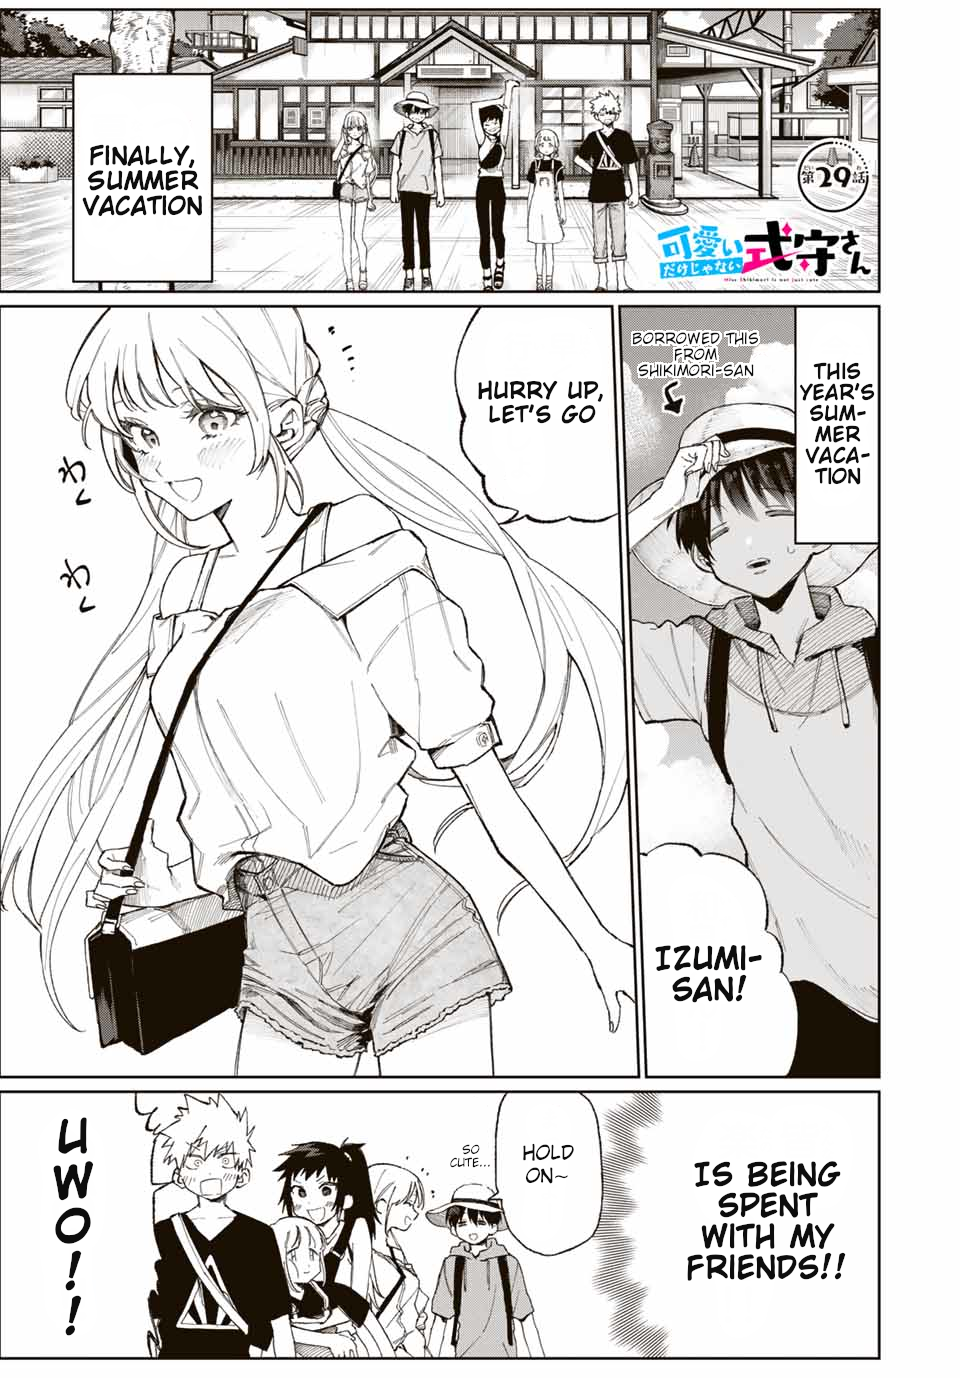 Shikimori's Not Just A Cutie Vol.2 Chapter 29 - Picture 2